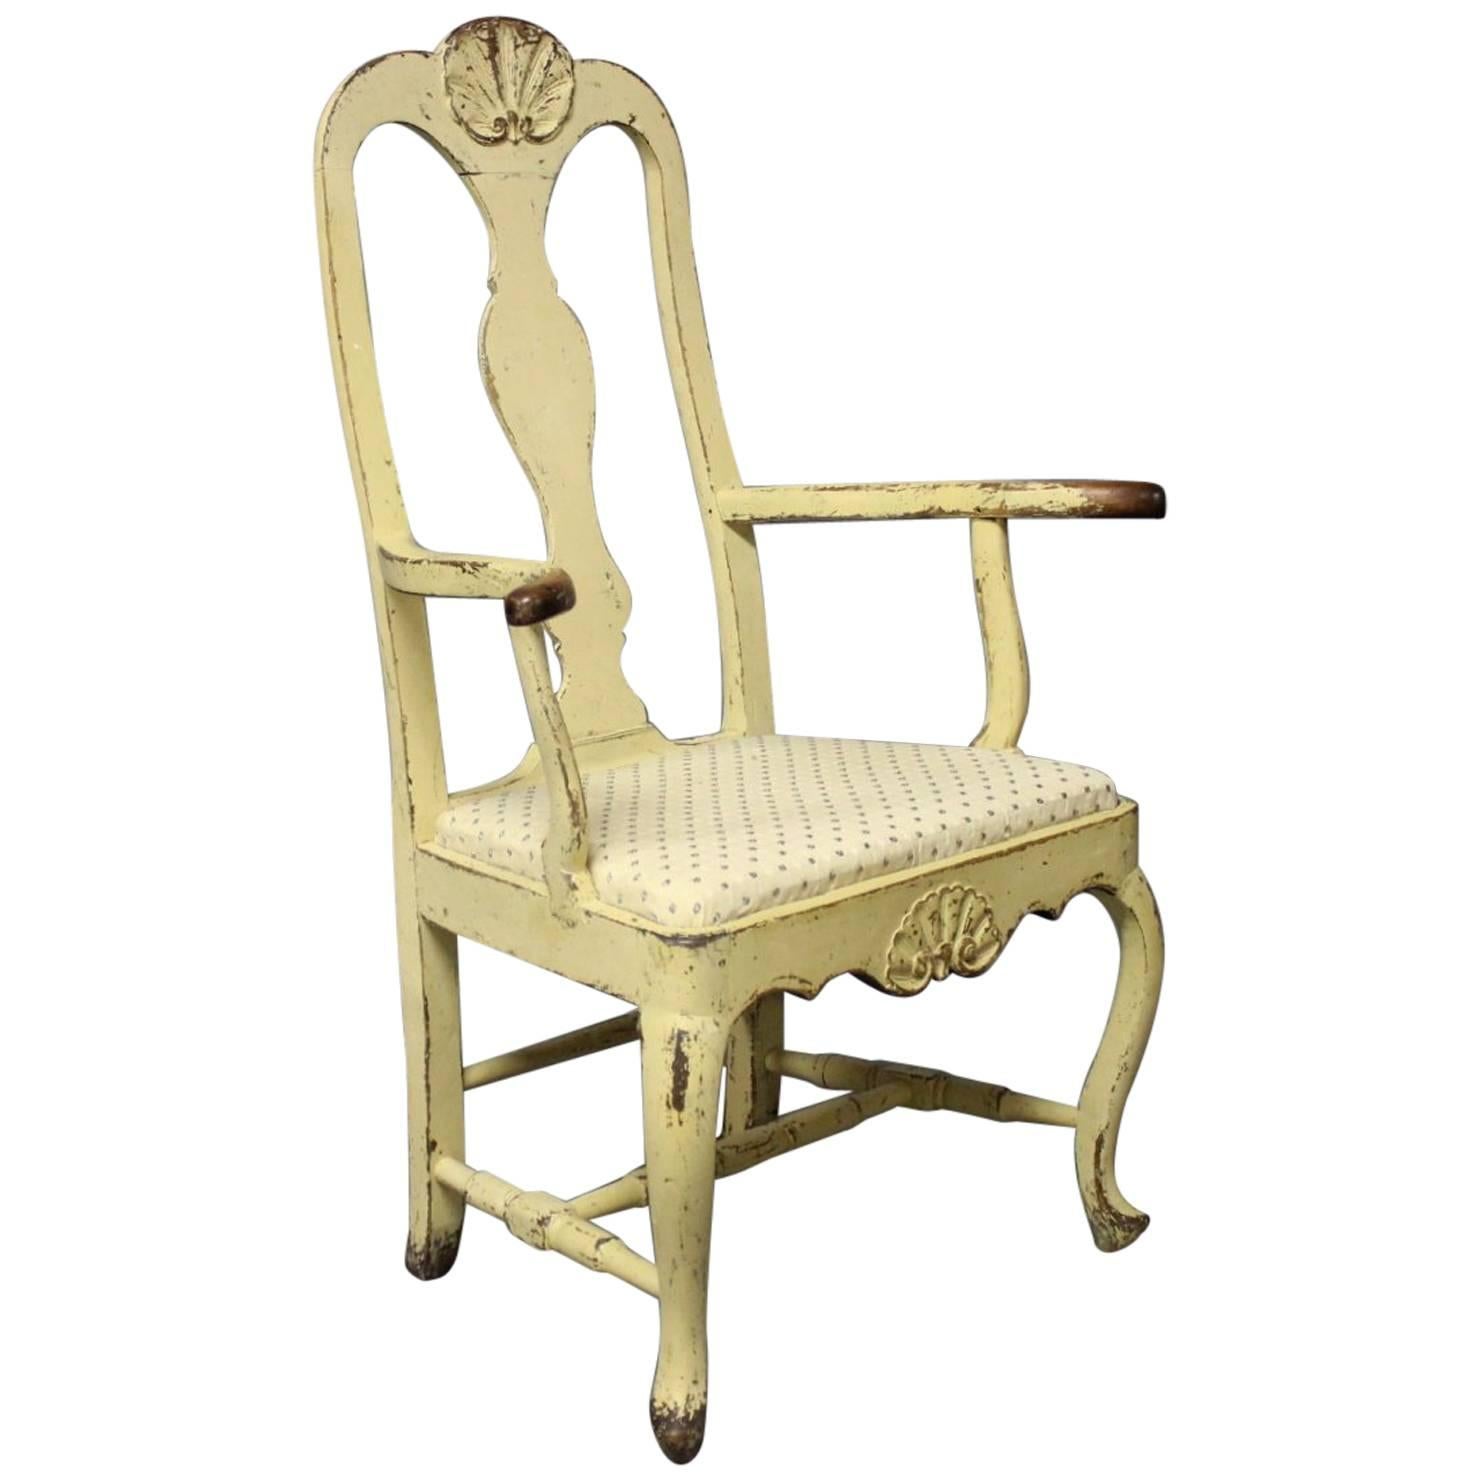 Rococo Chair in Painted Wood from Denmark Around the Year, 1740